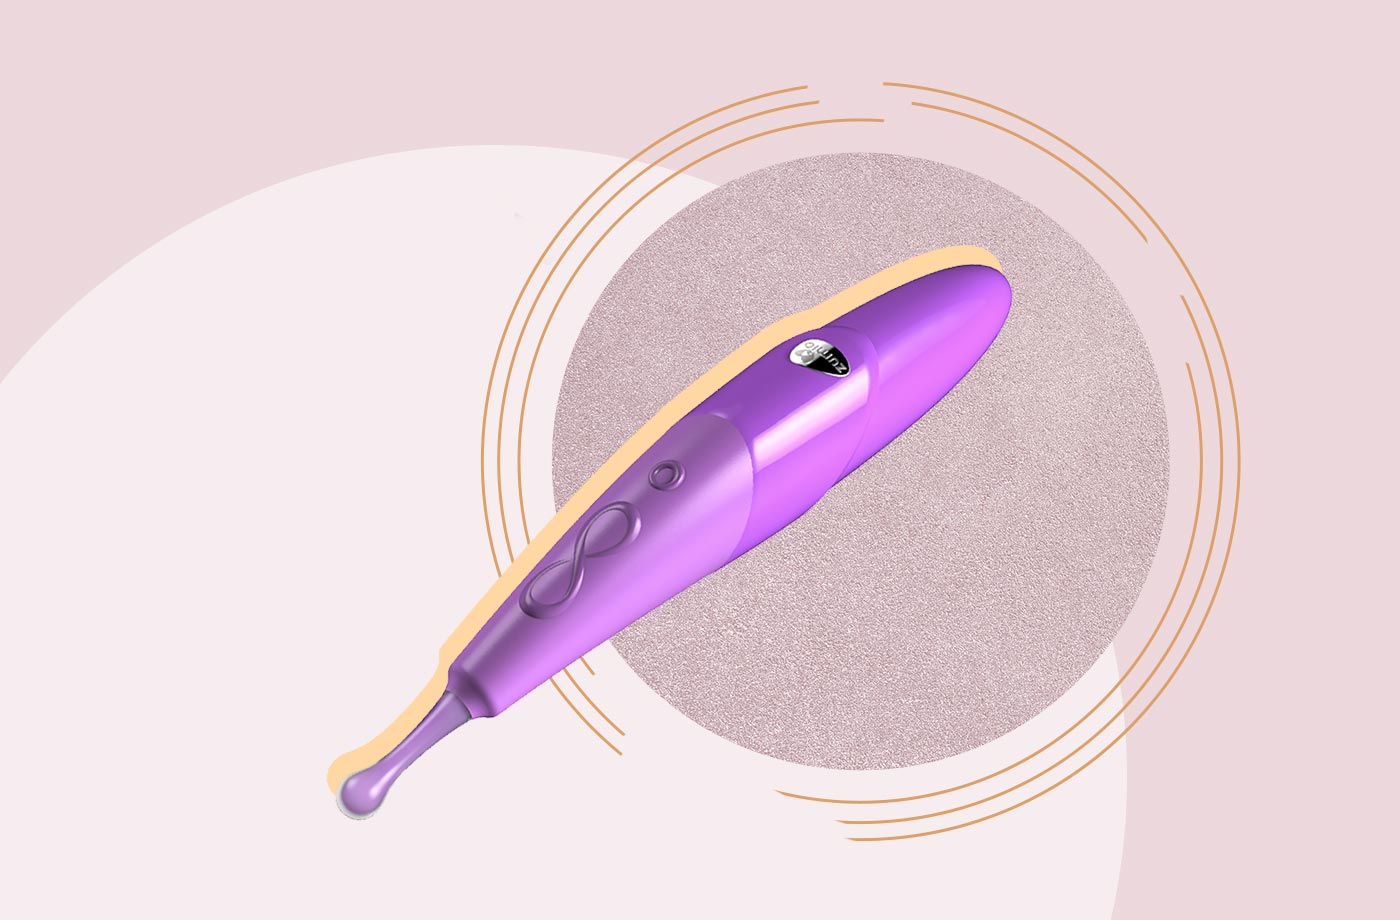 This sex toy looks like an electric toothbrush and will make your head spin...